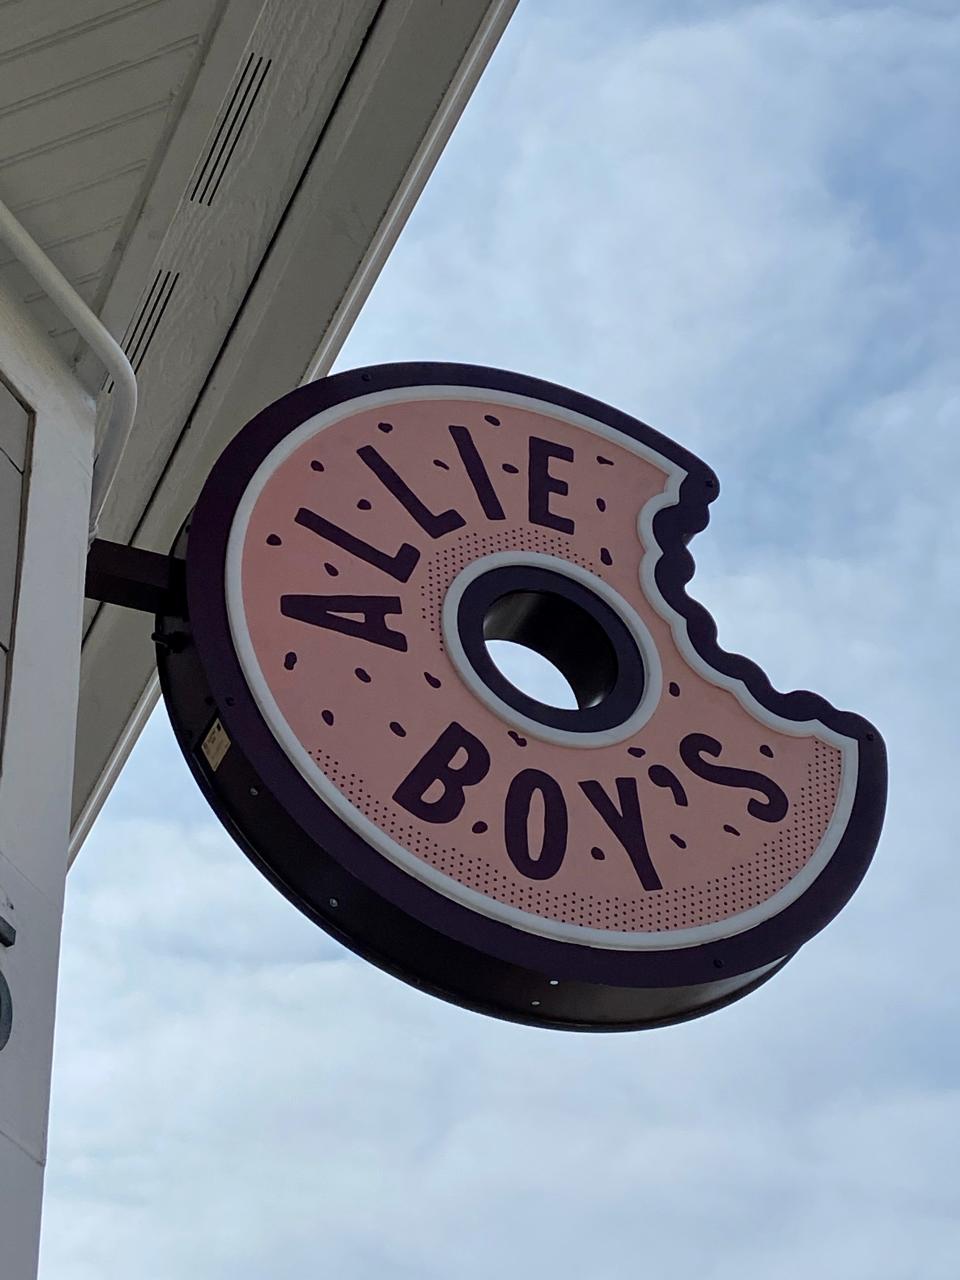 Allie Boy's features hand rolled bagels, its own lox, and a family recipe for matzo ball soup.